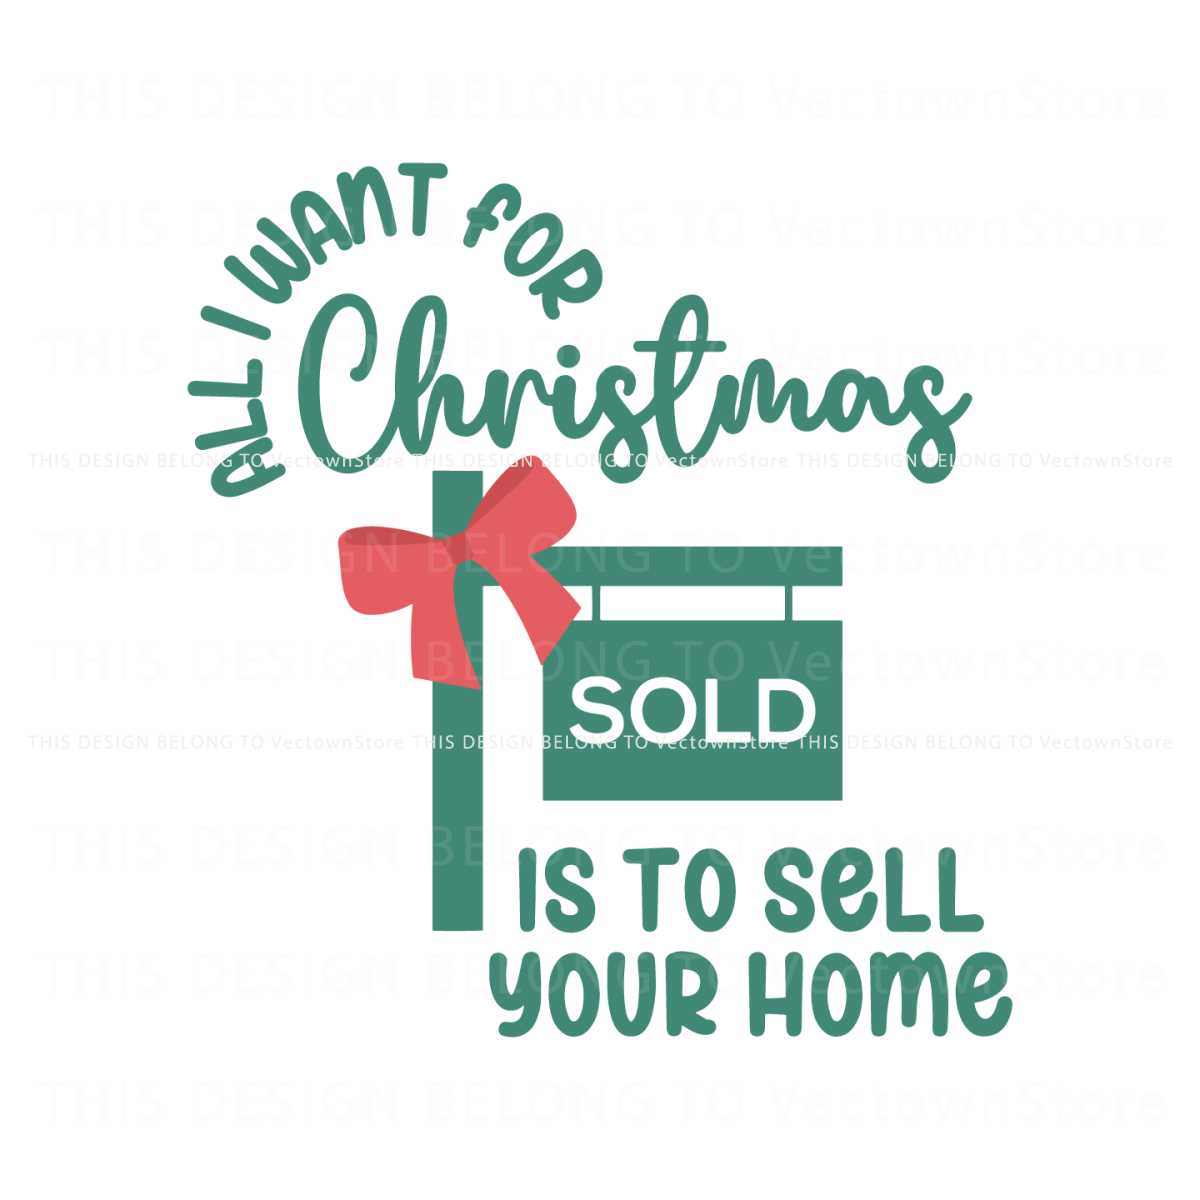 All I Want For Christmas Sold Is To Sell Your Home SVG File
🛒: vectown.com/product/all-i-…
#digital #trending #svgfiles #pngfiles #design #christmas #hollyjolly #groovy #groovychristmas #tistheseason #merrychristmas #christmasquotes #christmasgift